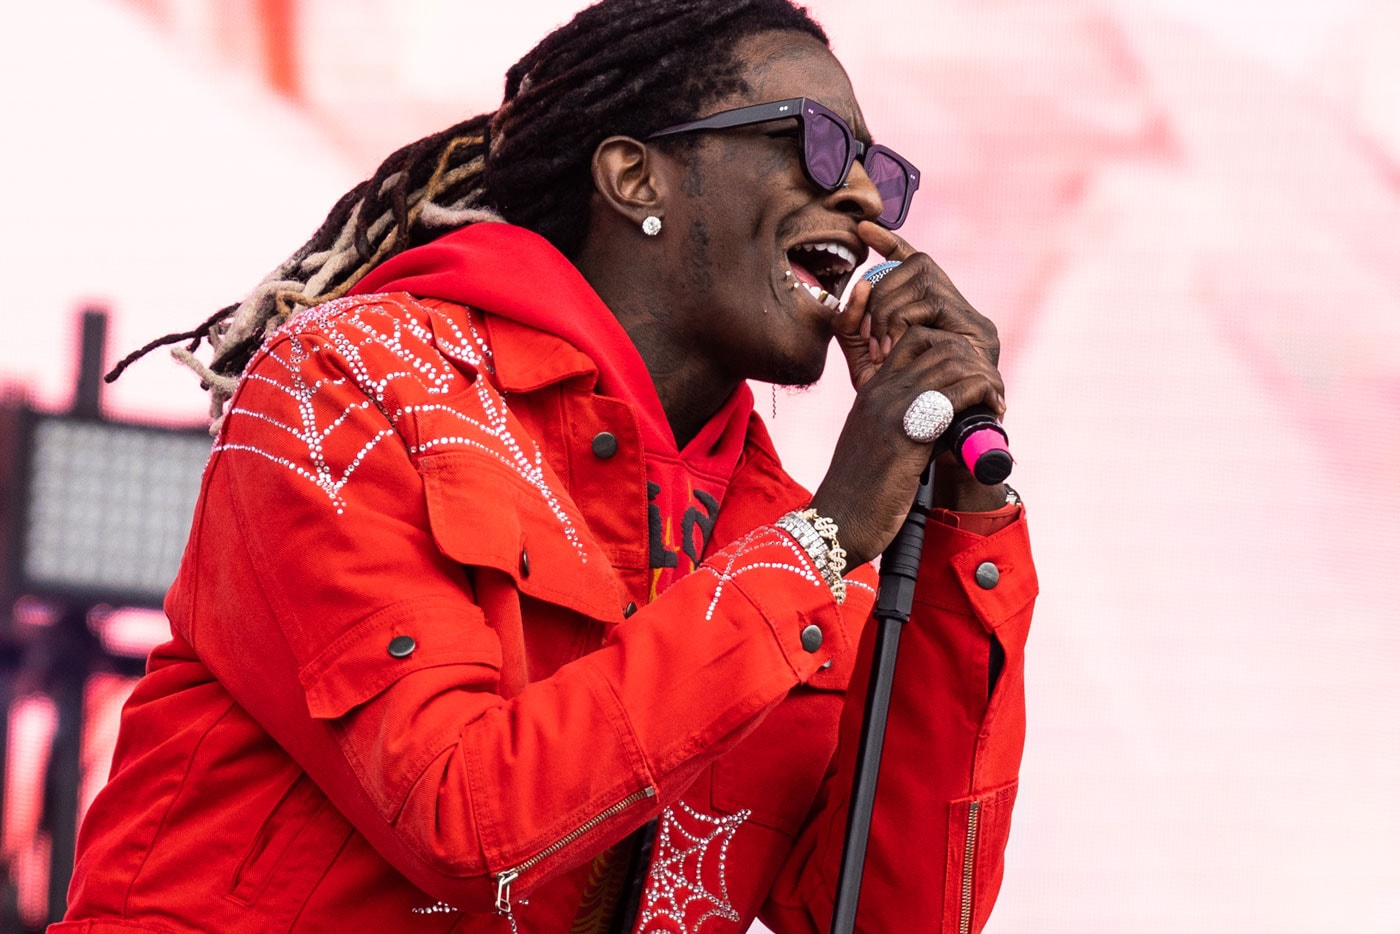 Young Thug Brings Out Future, Usher & Wyclef Jean in NYC Show